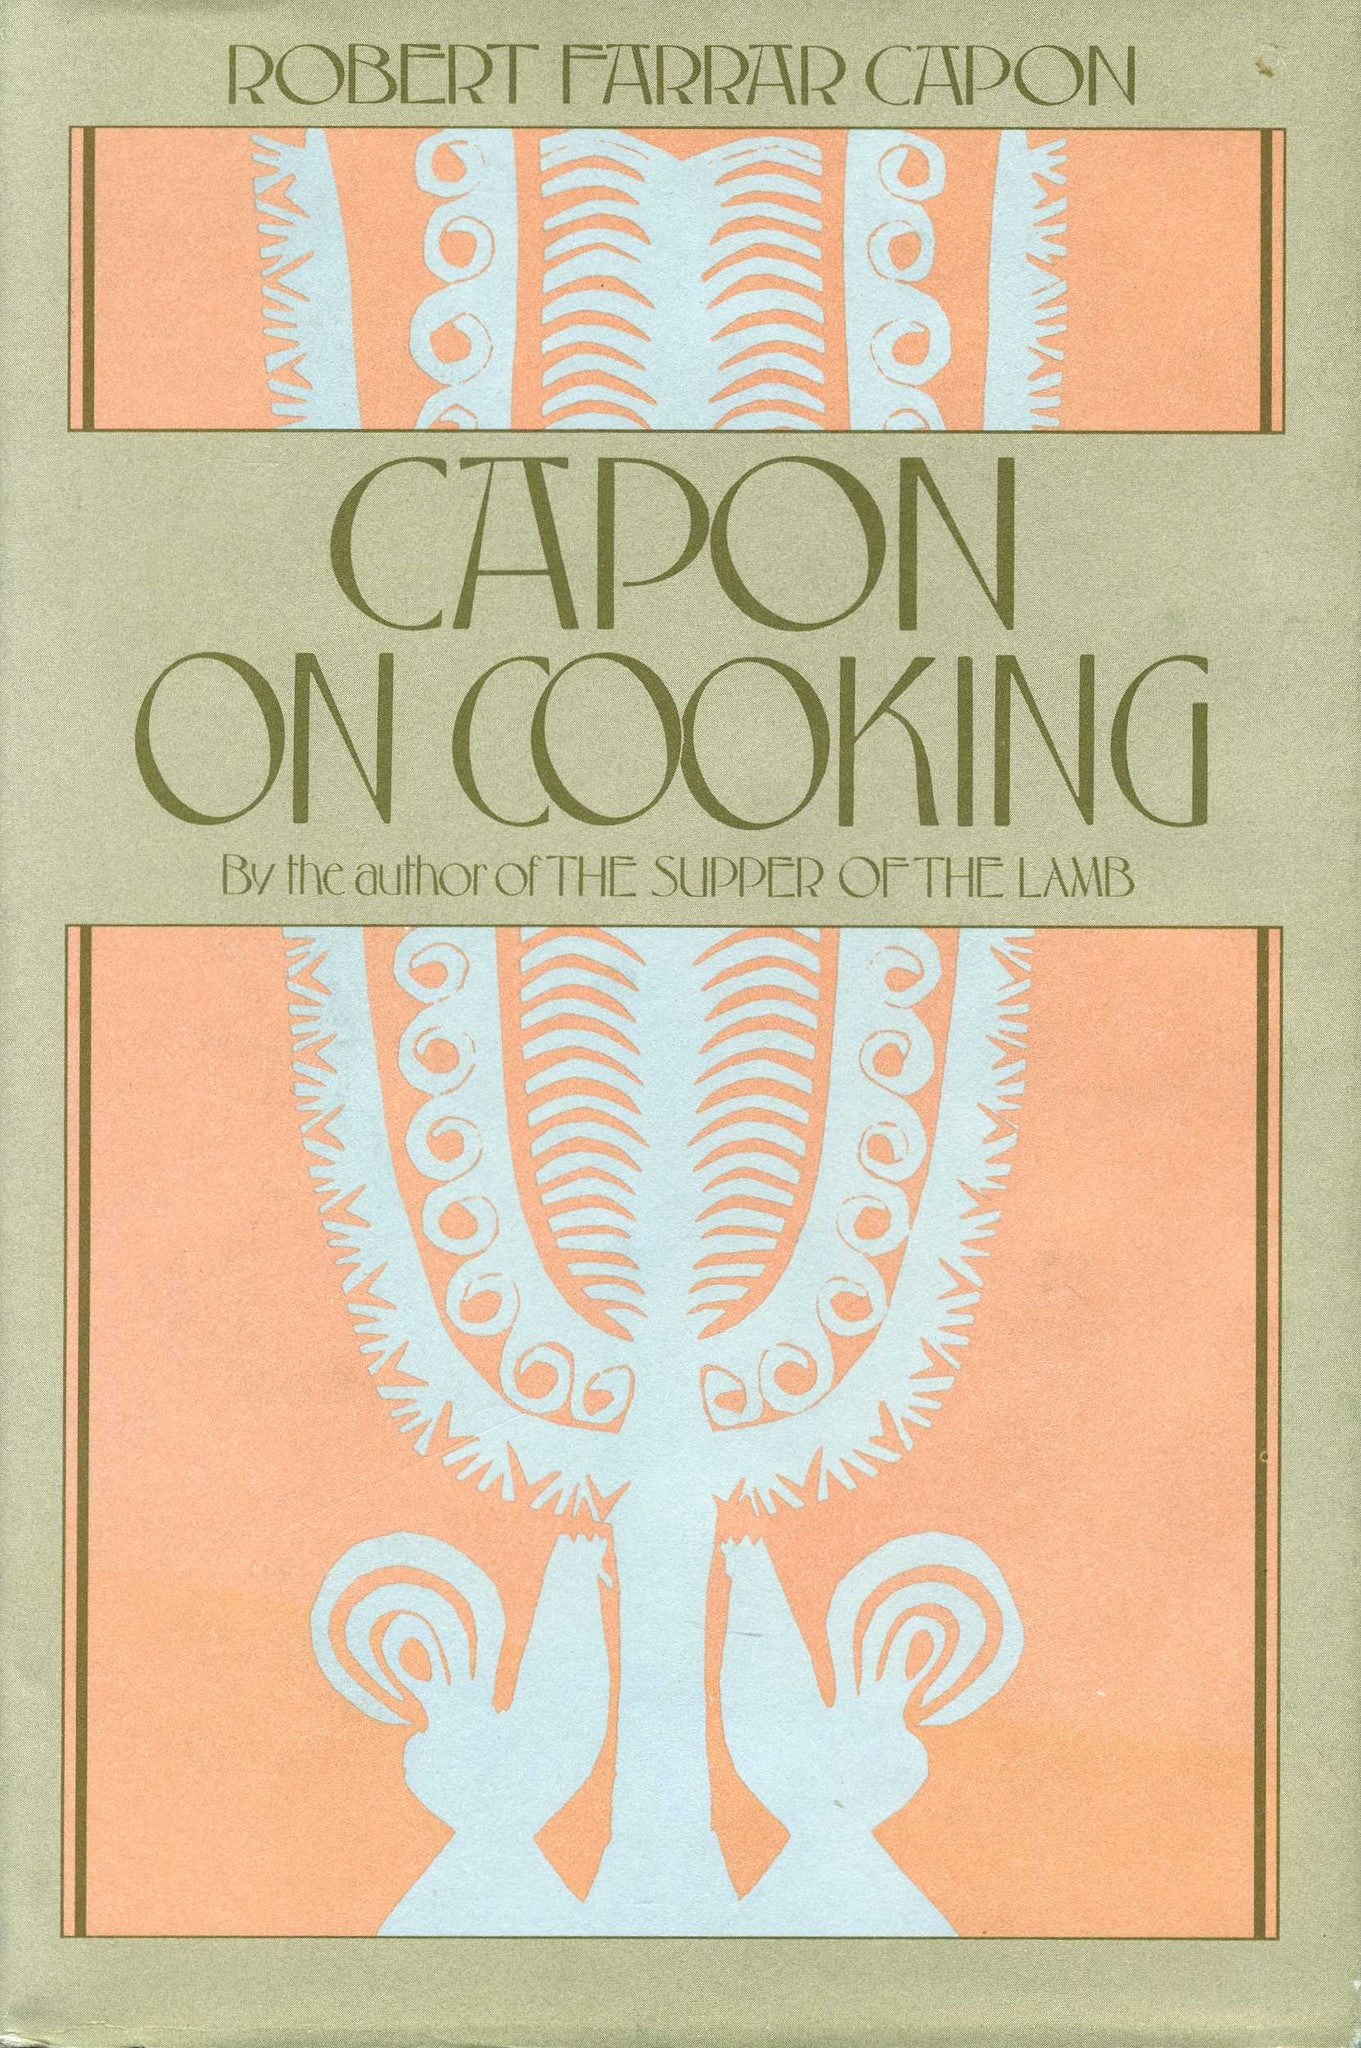 CAPON ON COOKING